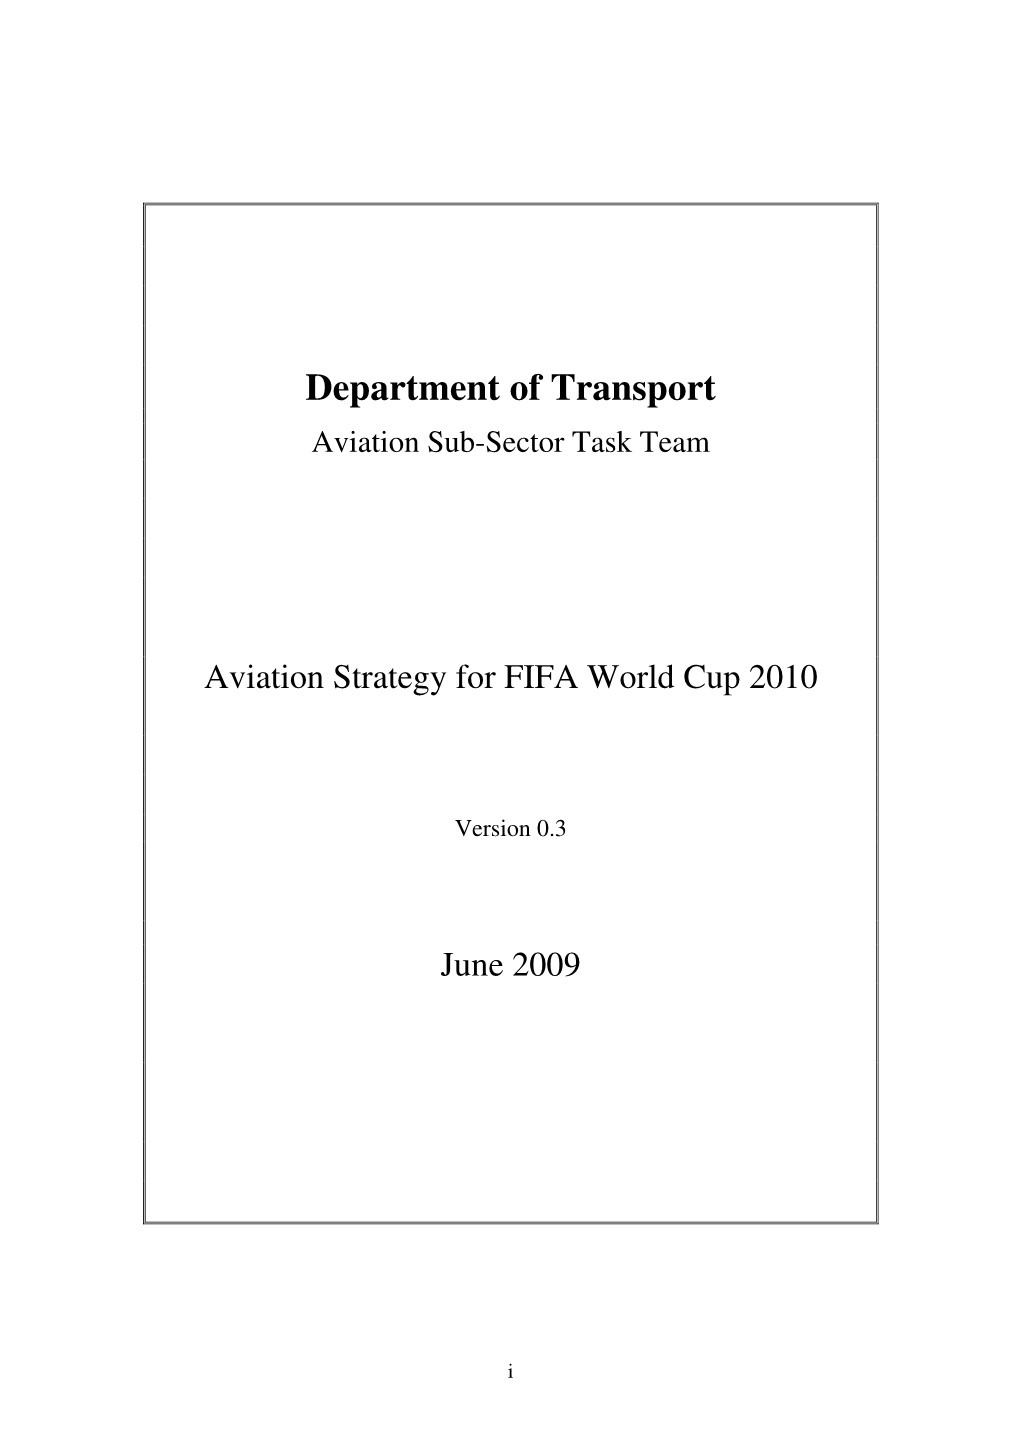 Aviation Strategy for FIFA World Cup 2010